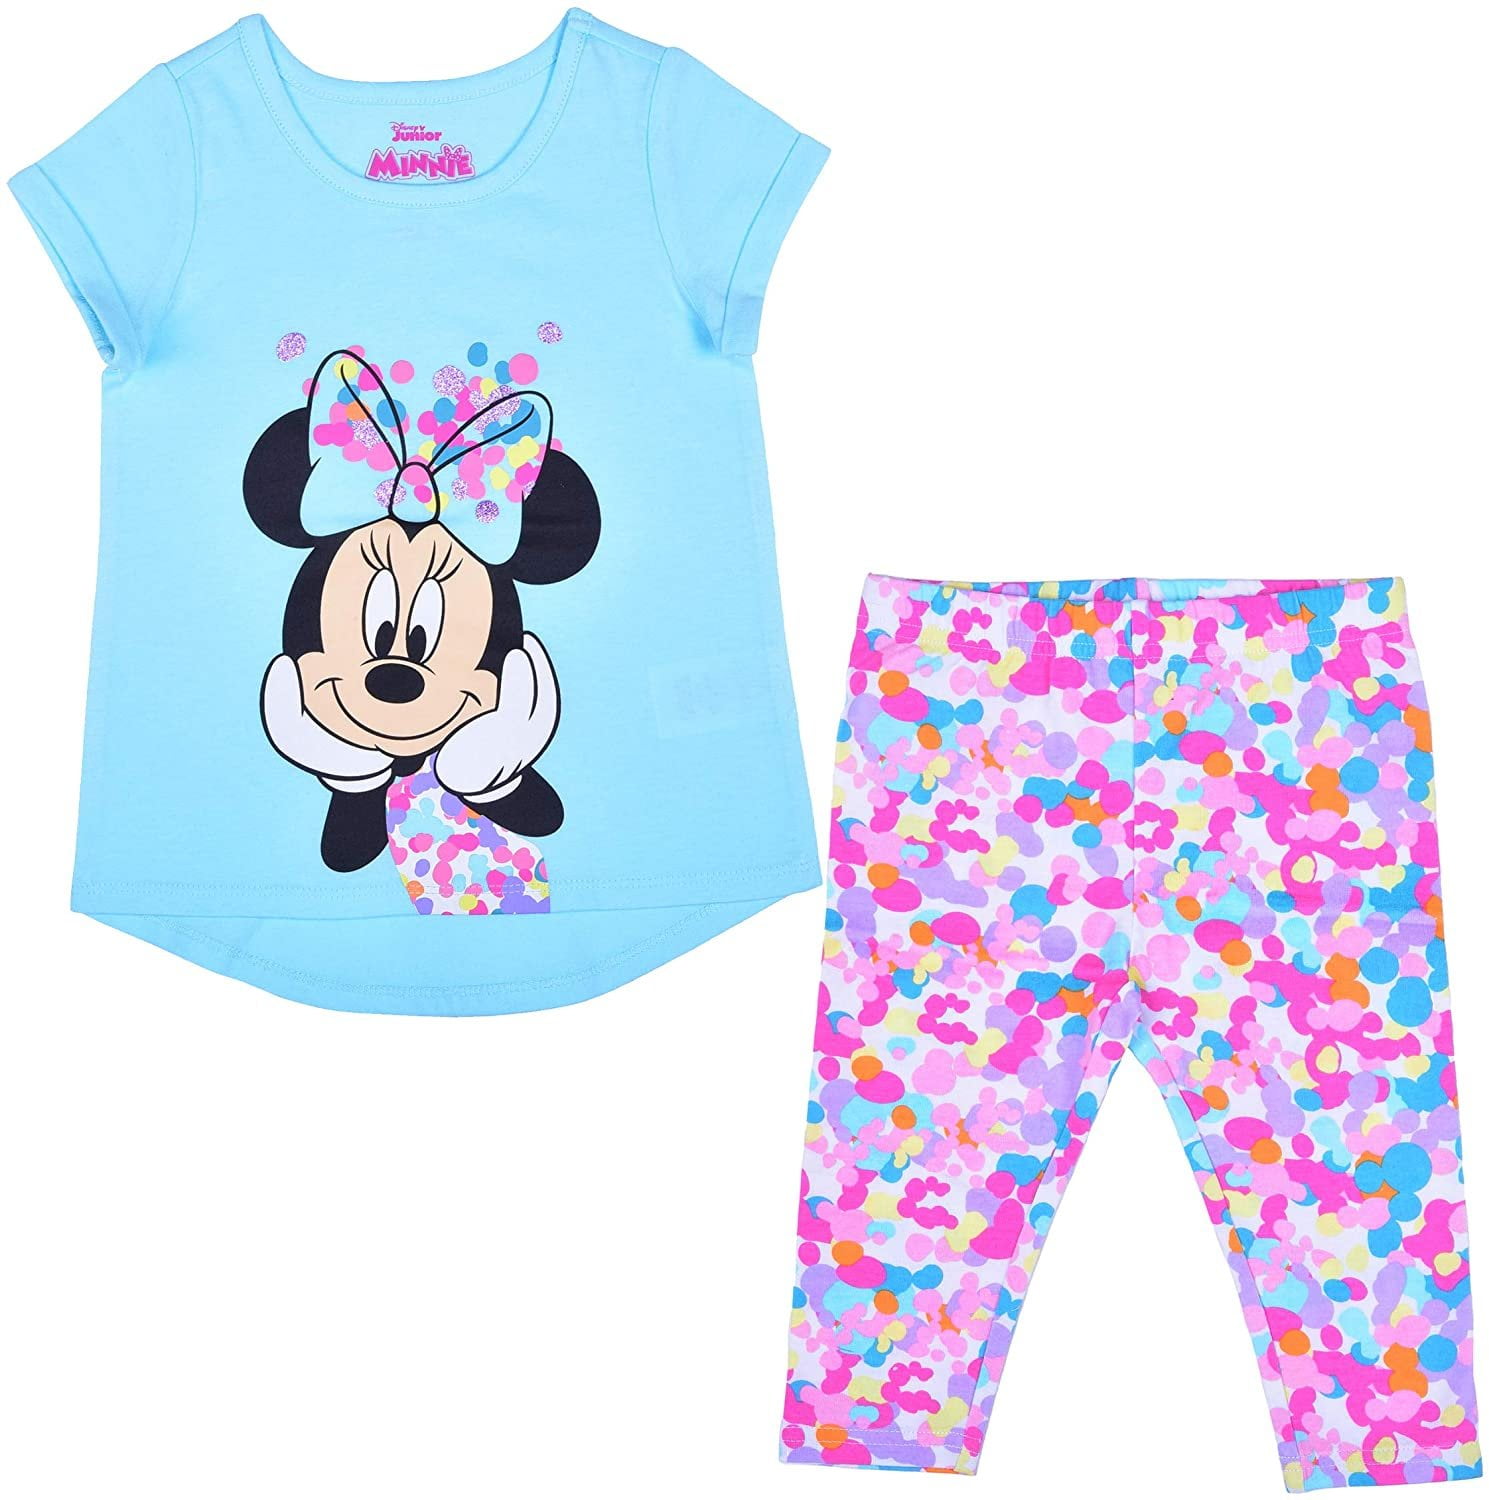 Disney Birthday Gift Minnie Mouse Love is Sweet Tunic & Blk Leggings SIZE 2T-4T 